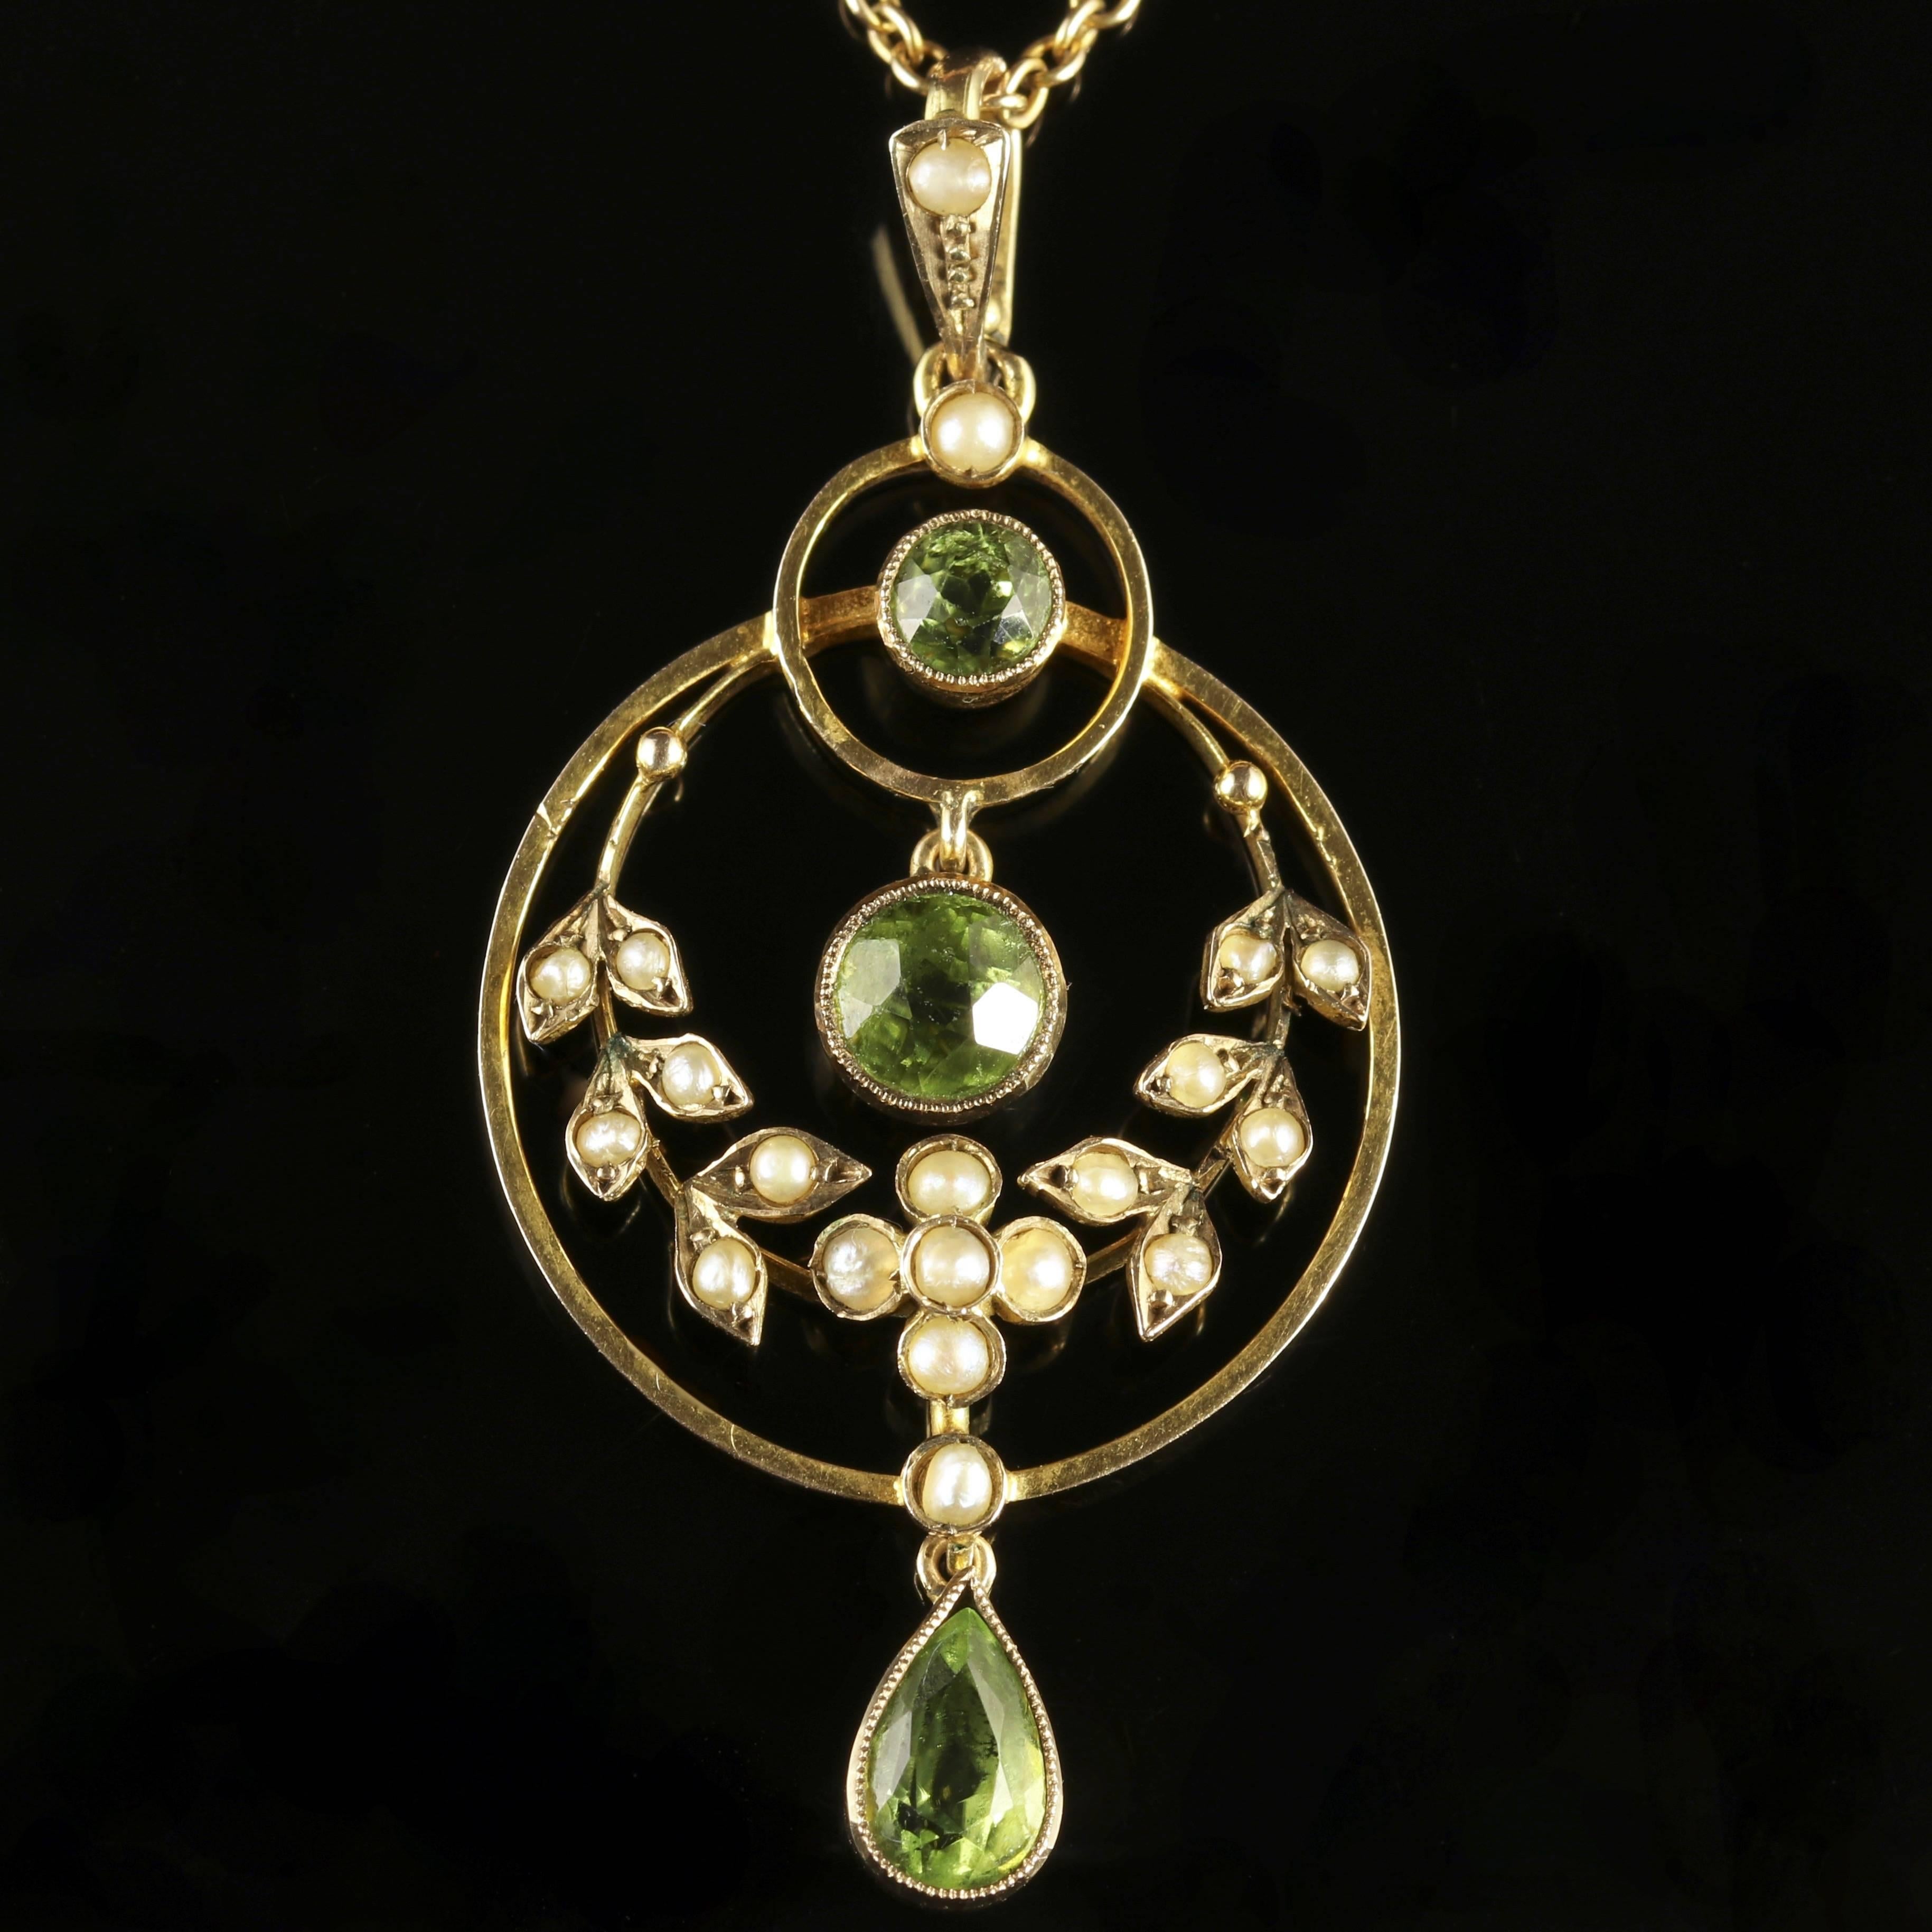 To read more please click continue reading below-

This fabulous 9ct Yellow Gold necklace is genuine Victorian, Circa 1900

The beautiful floral pendant is adorned a trilogy of rich green Peridots cascading down the central gallery.

The Peridot is